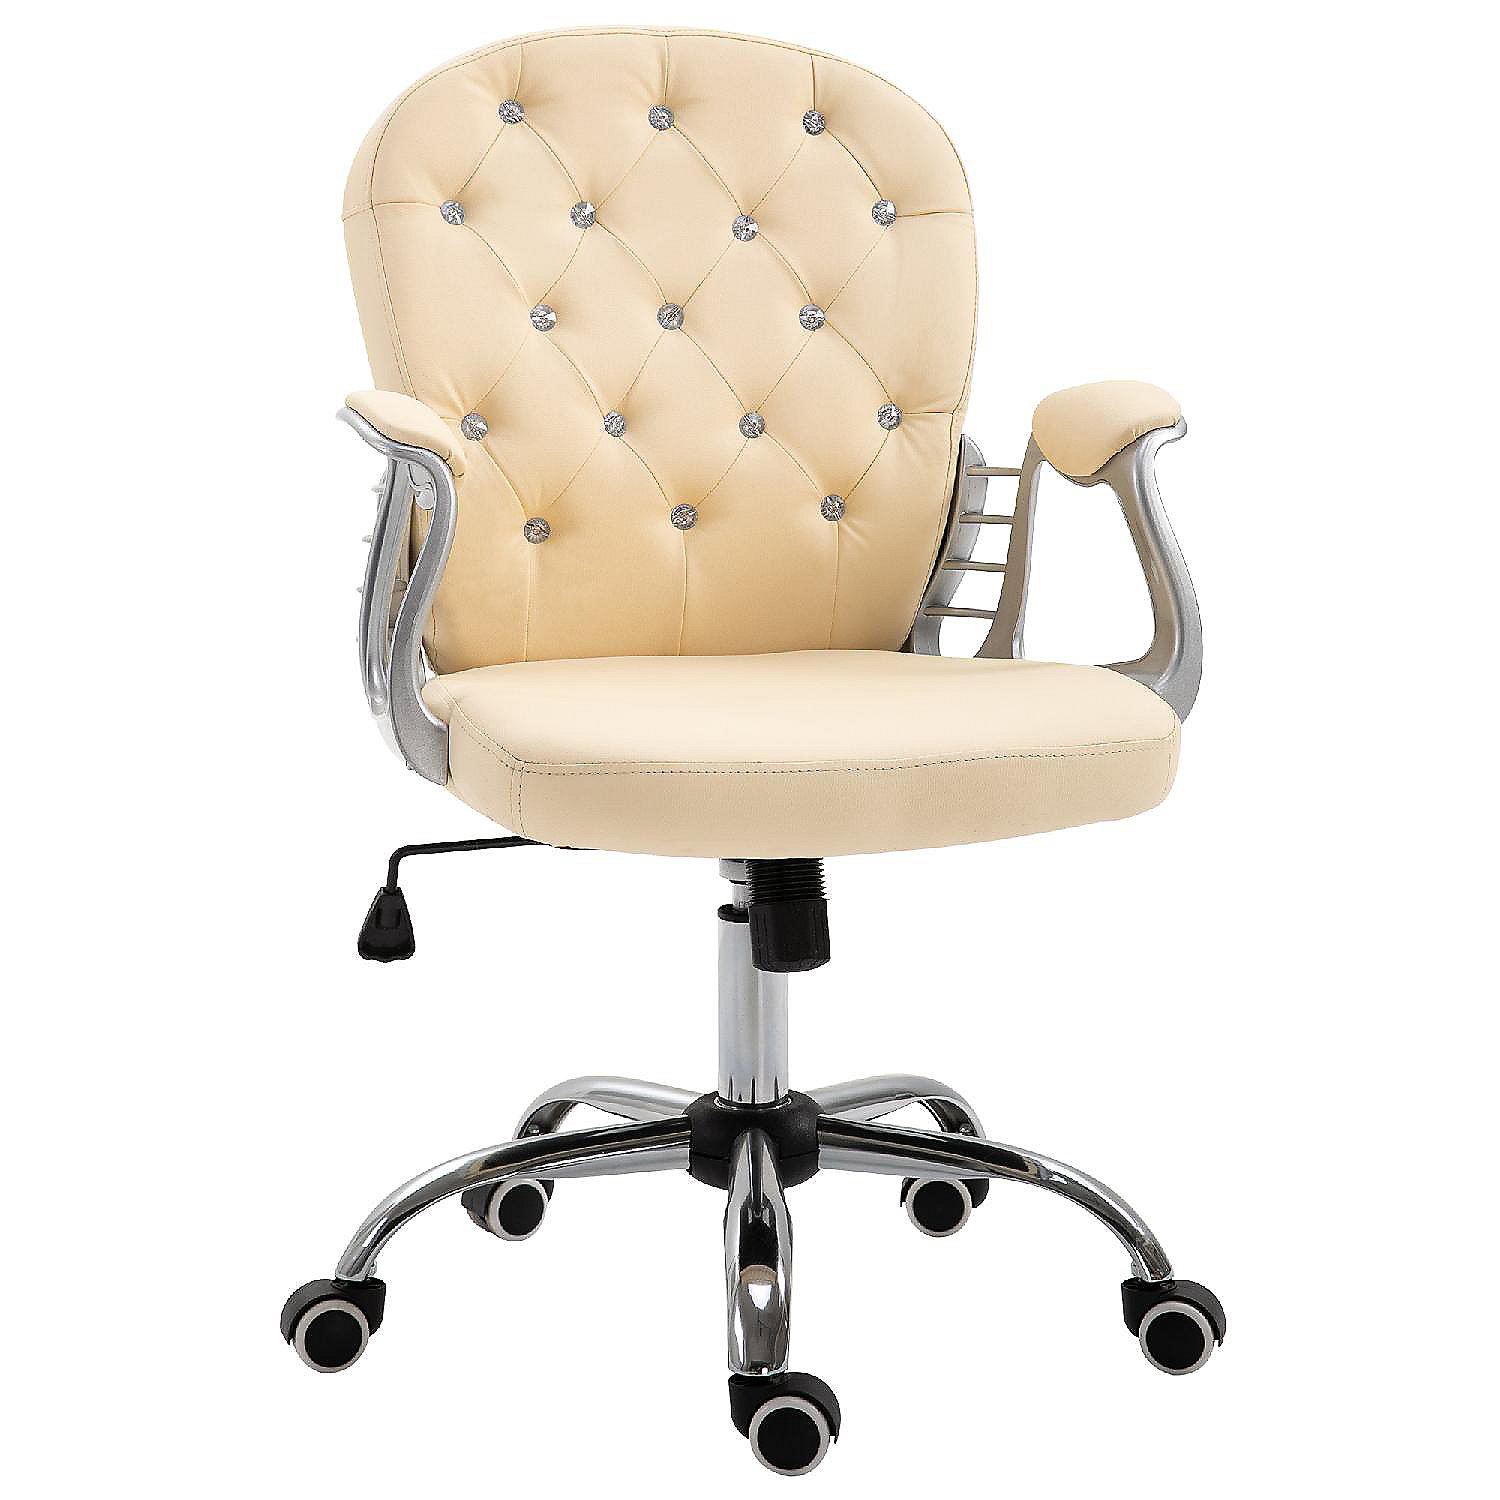 Vinsetto Vanity PU Leather Mid Back Office Chair Swivel Tufted Backrest Task  Chair with Padded Armrests Adjustable Height Rolling Wheels Beige |  Oriental Trading